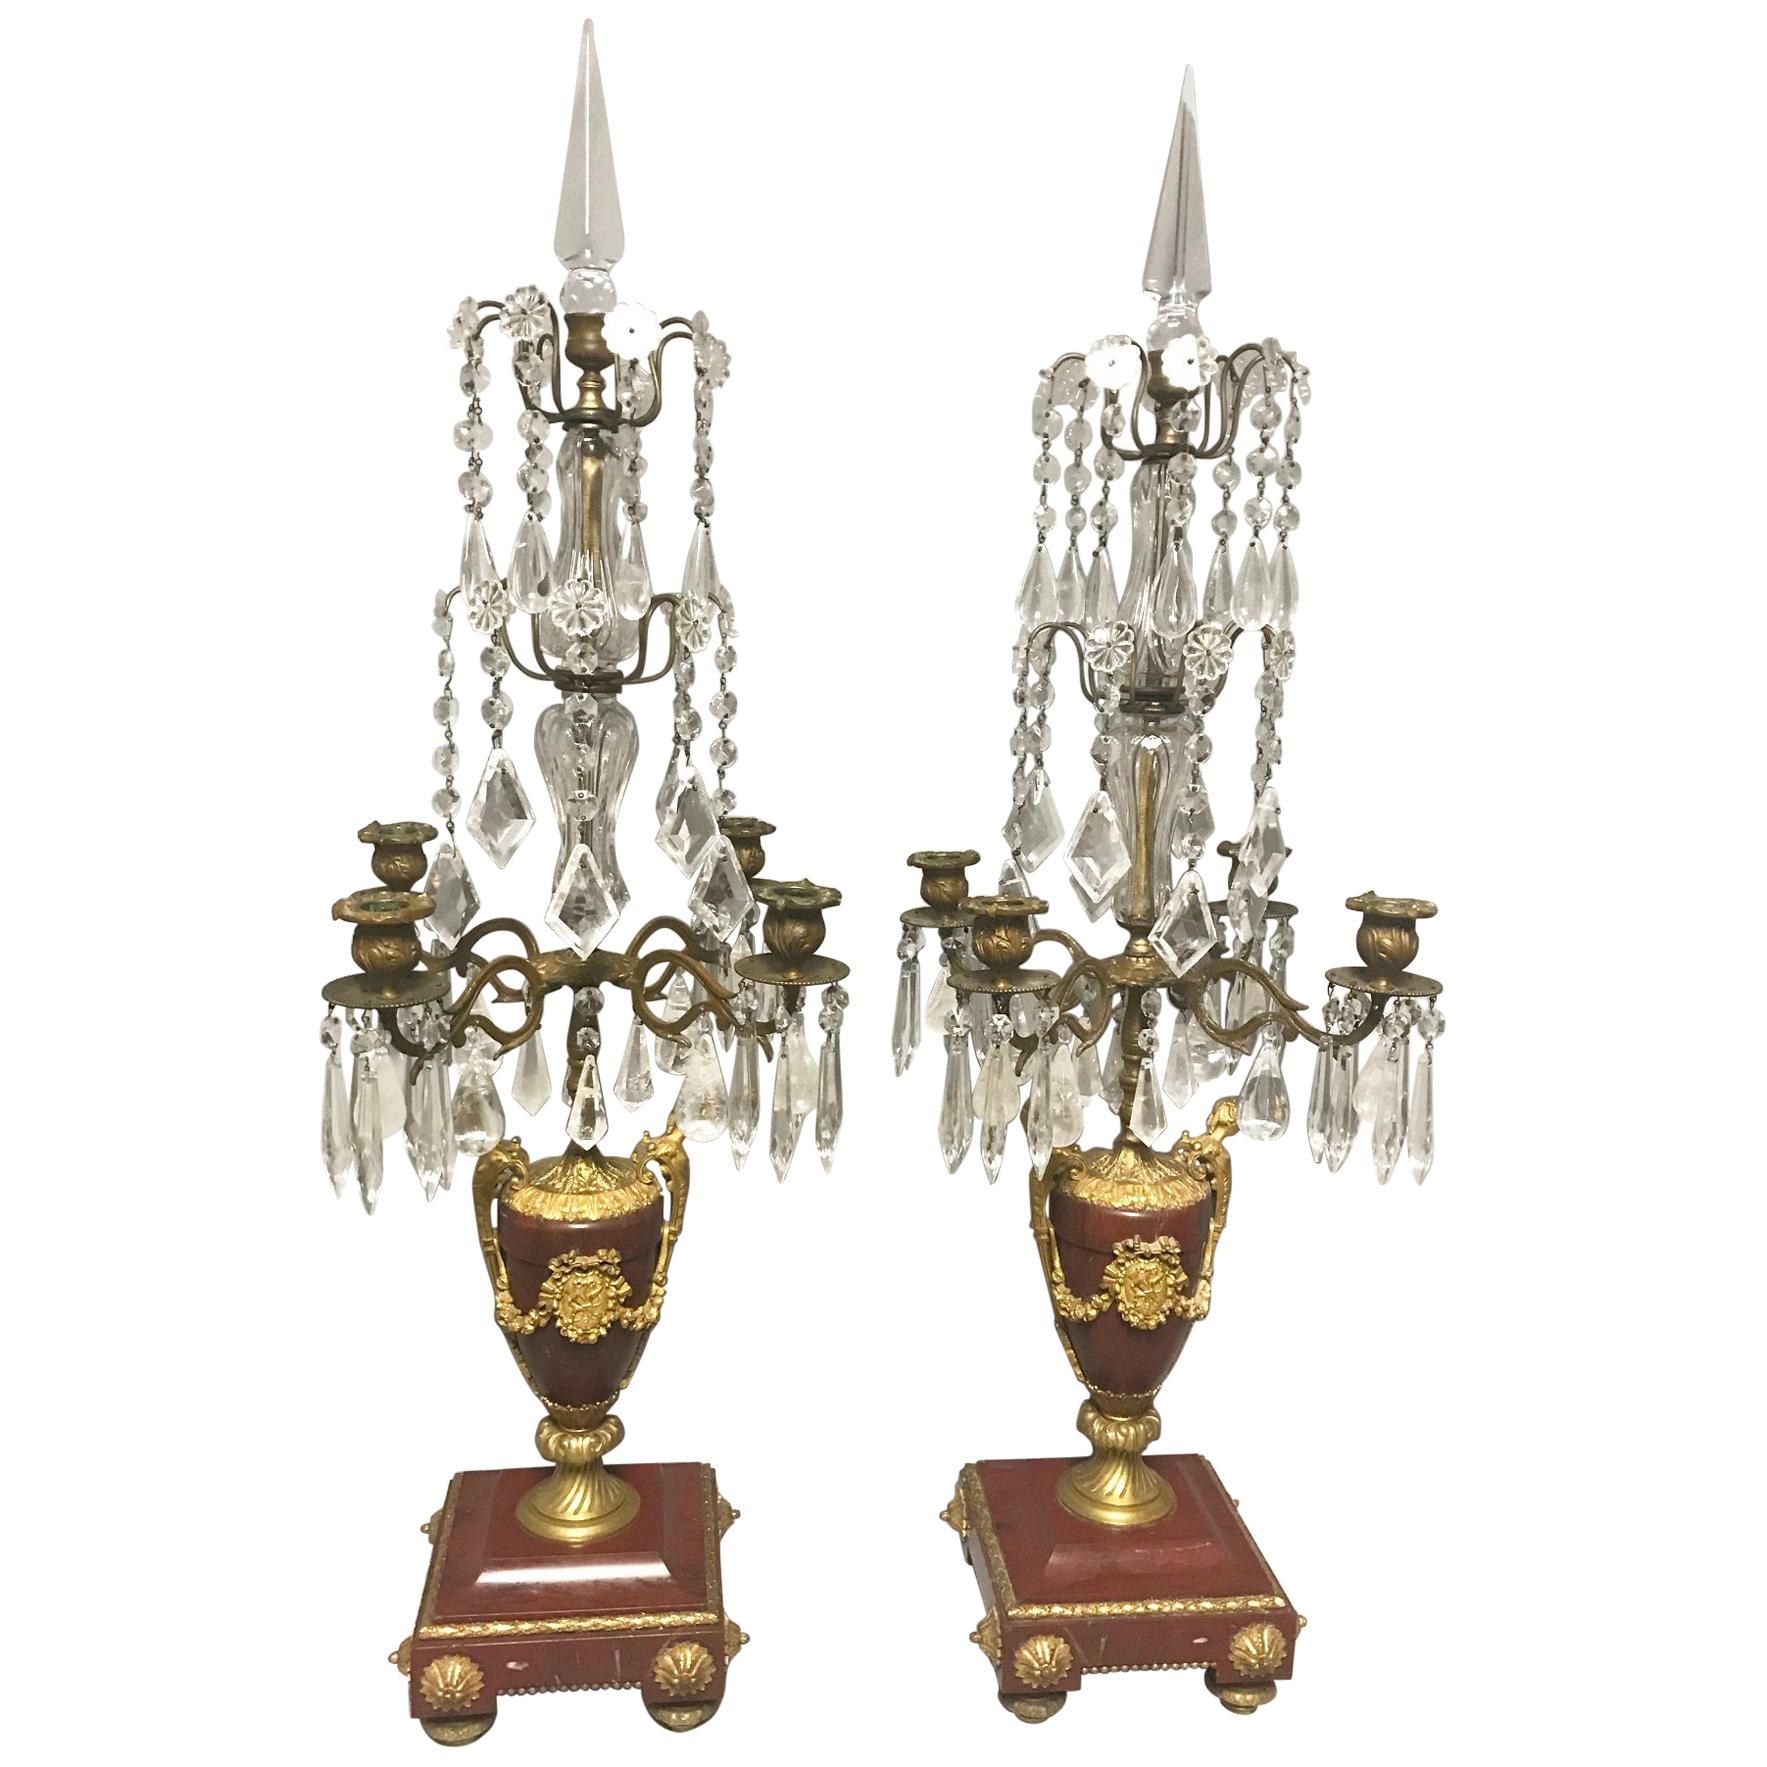 Pair of French Rouge Marble & Rock Crystal Ormolu Lamps, 19th Century